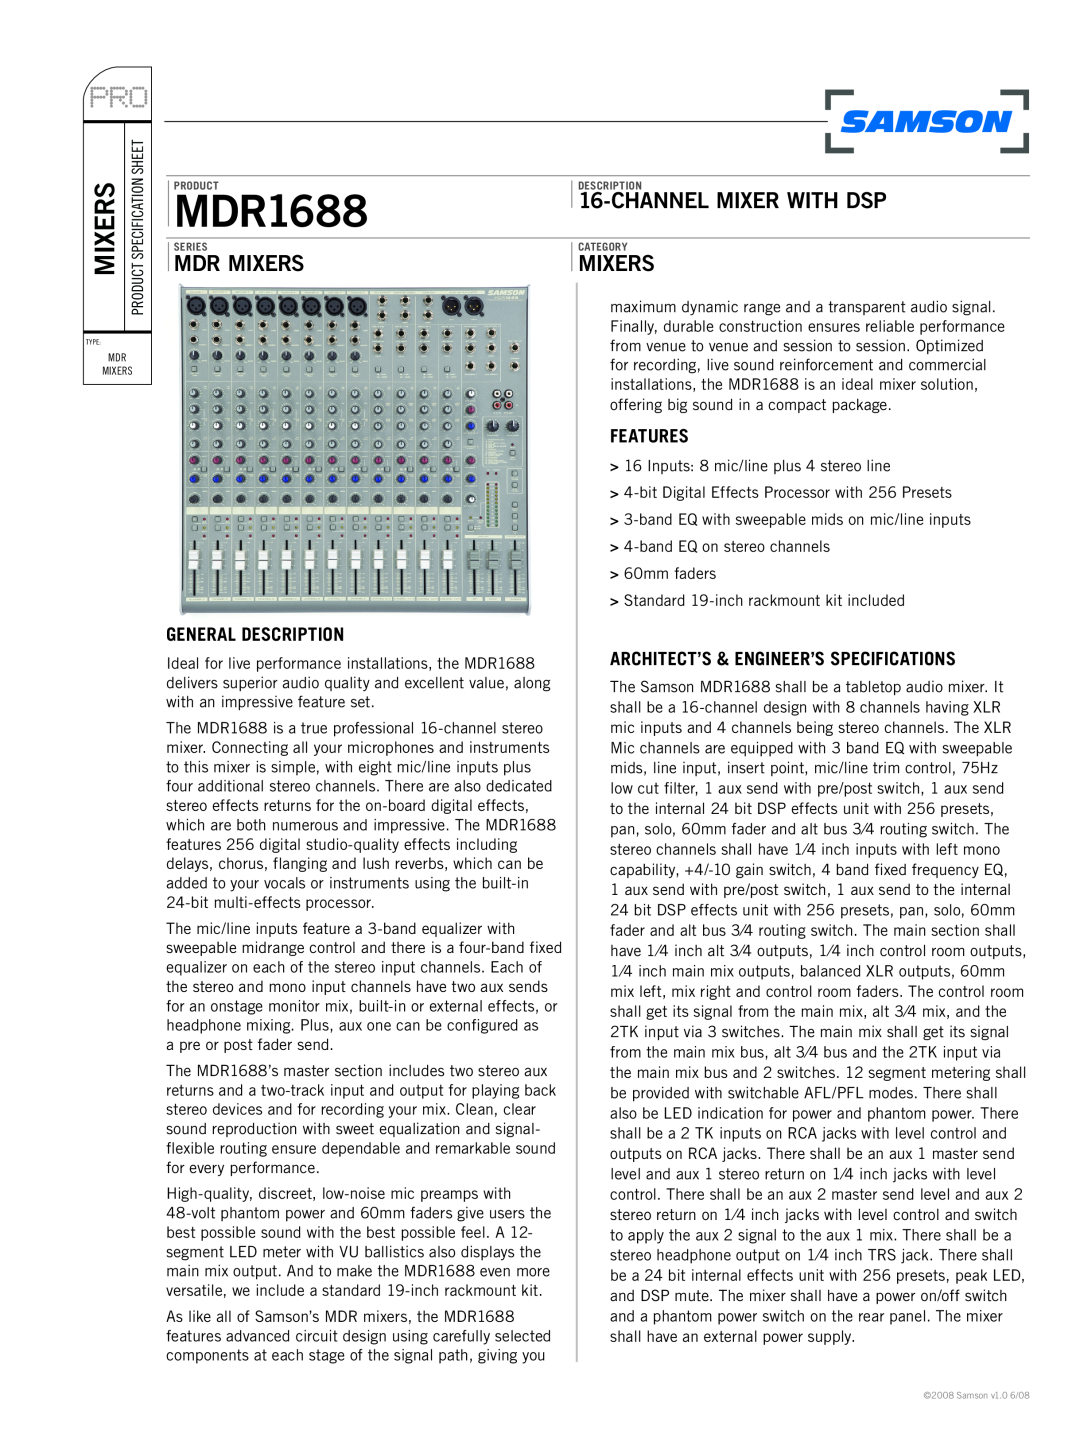 Samson MDR1688 specifications General Description, Features, Architect’S & Engineer’S Specifications, Mdr Mixers 